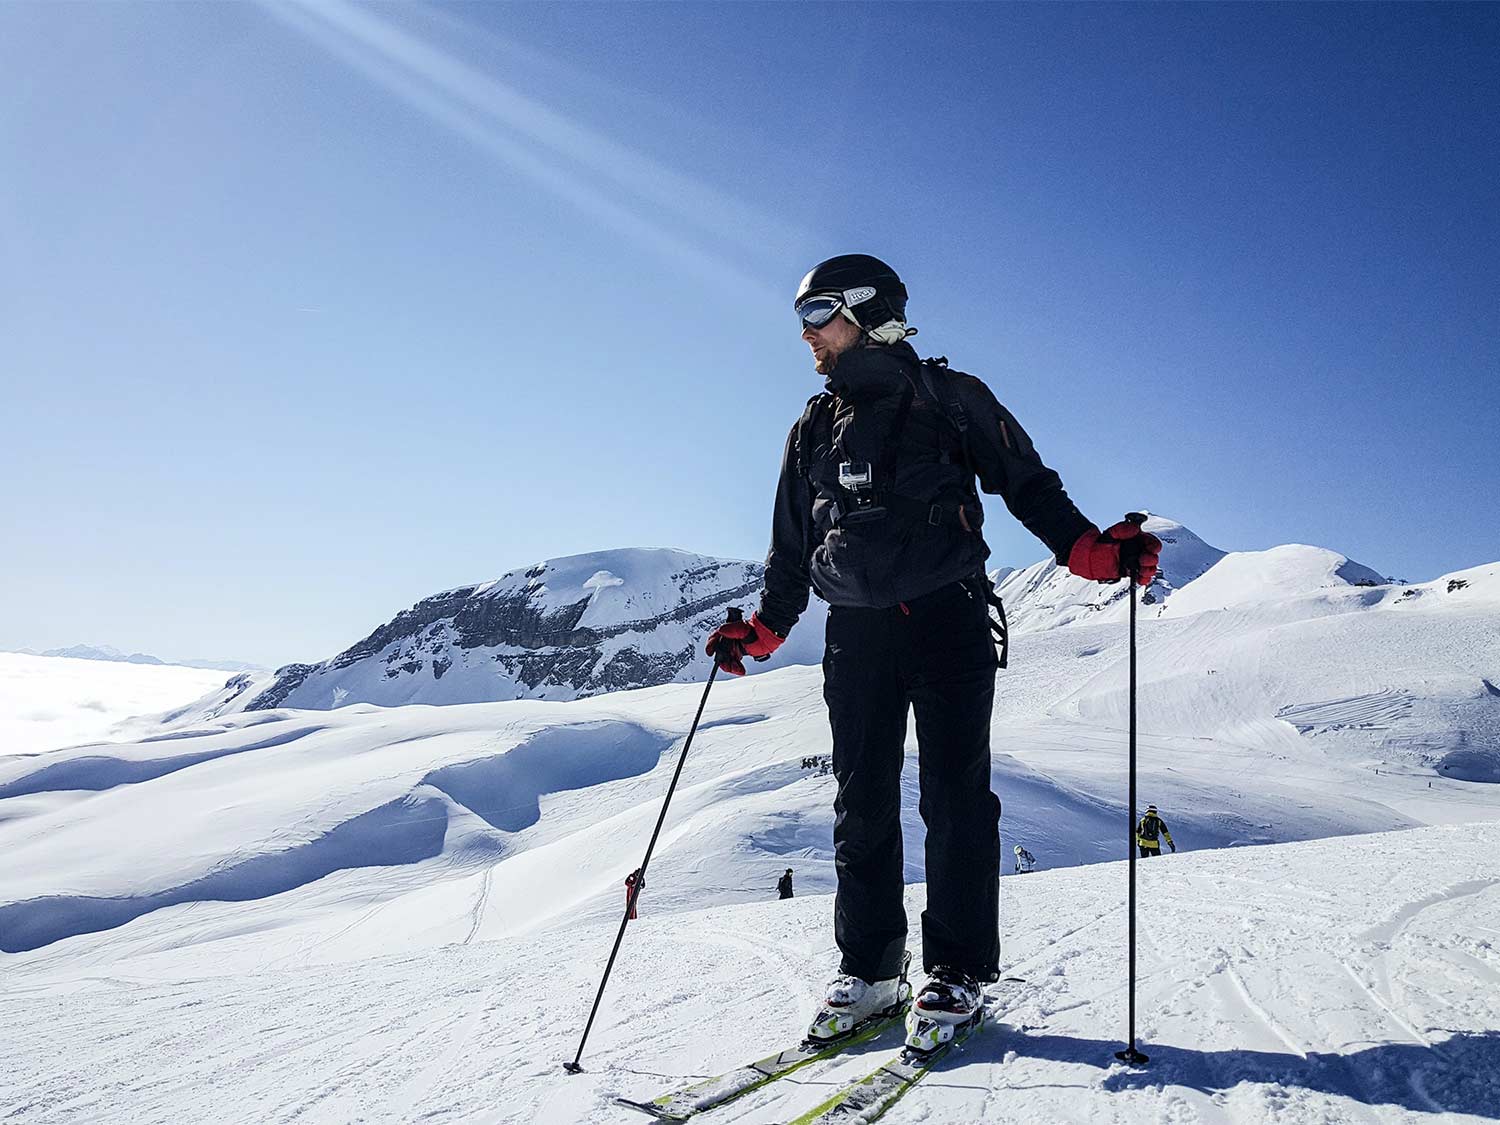 A man wearing skis and the best snow pants on a snowy mountain side.